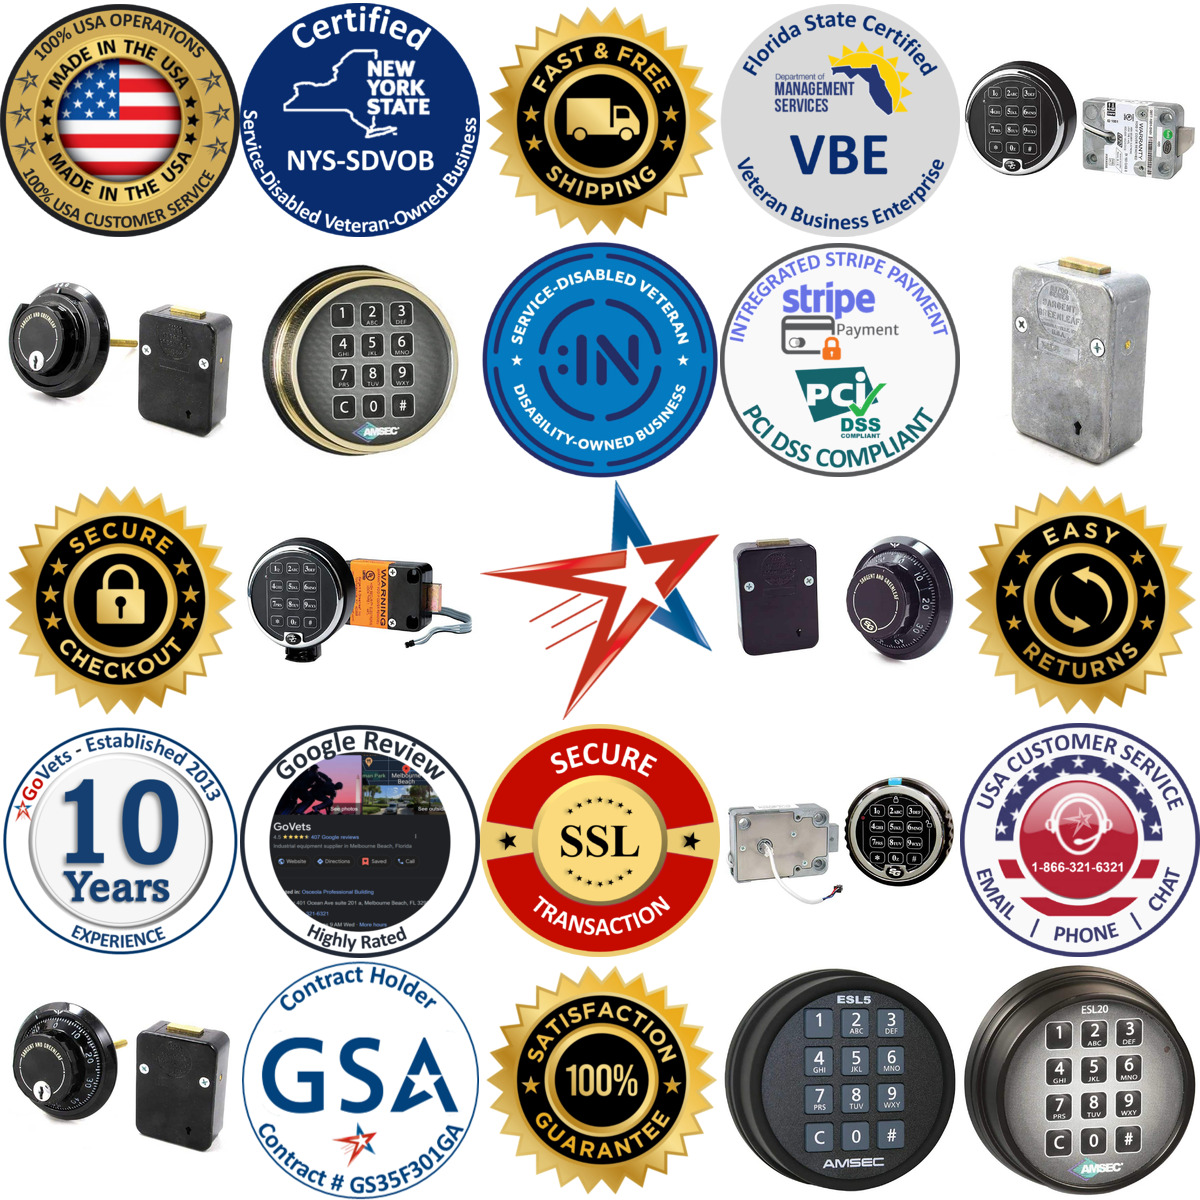 A selection of Safe Locks products on GoVets